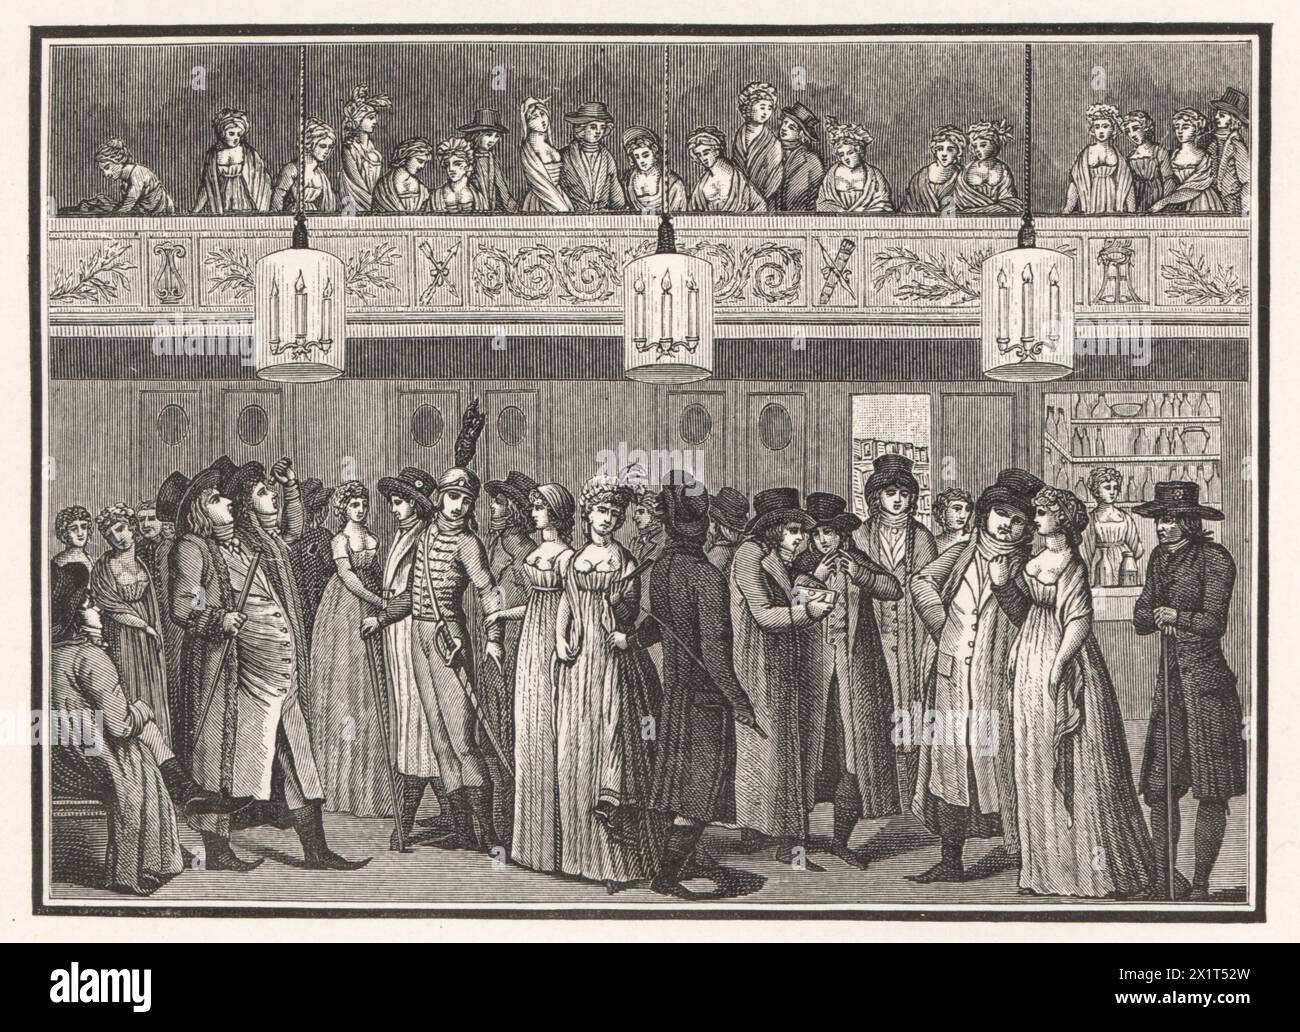 Playgoers in the lobby of Theatre Montansier in the Palais Royale, 1790-1806. Run by French actress and theatre director Mademoiselle Montansier. Engraving by Bovinet after an illustration by Louis Binet from Paul Lacroix's Directoire, Consulat et Empire, (Directory, Consulate and Empire), Paris, 1884. Stock Photo